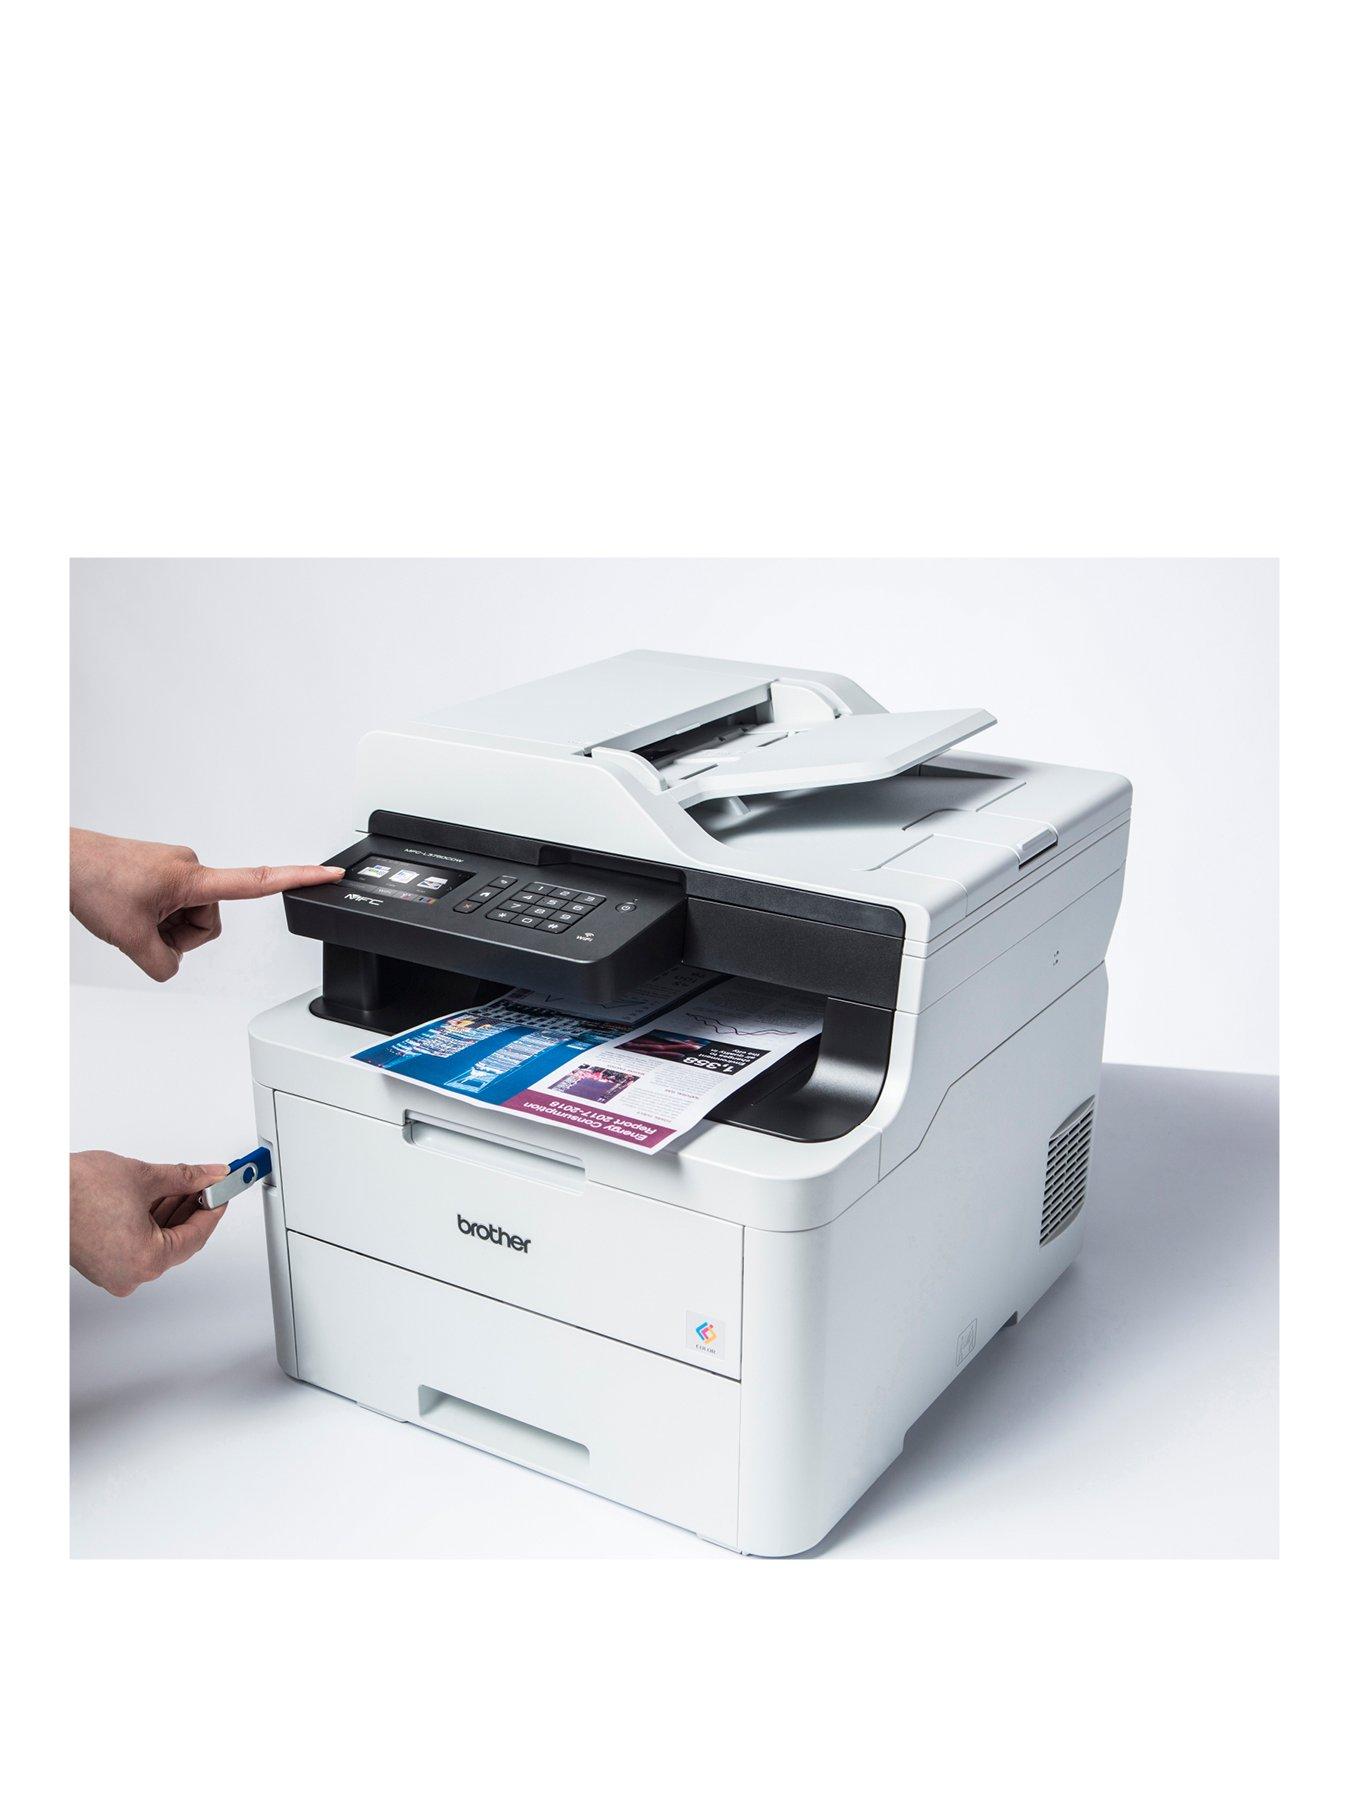 MFC-L3750CDW 4-in-1 wired and wireless colour LED laser printer